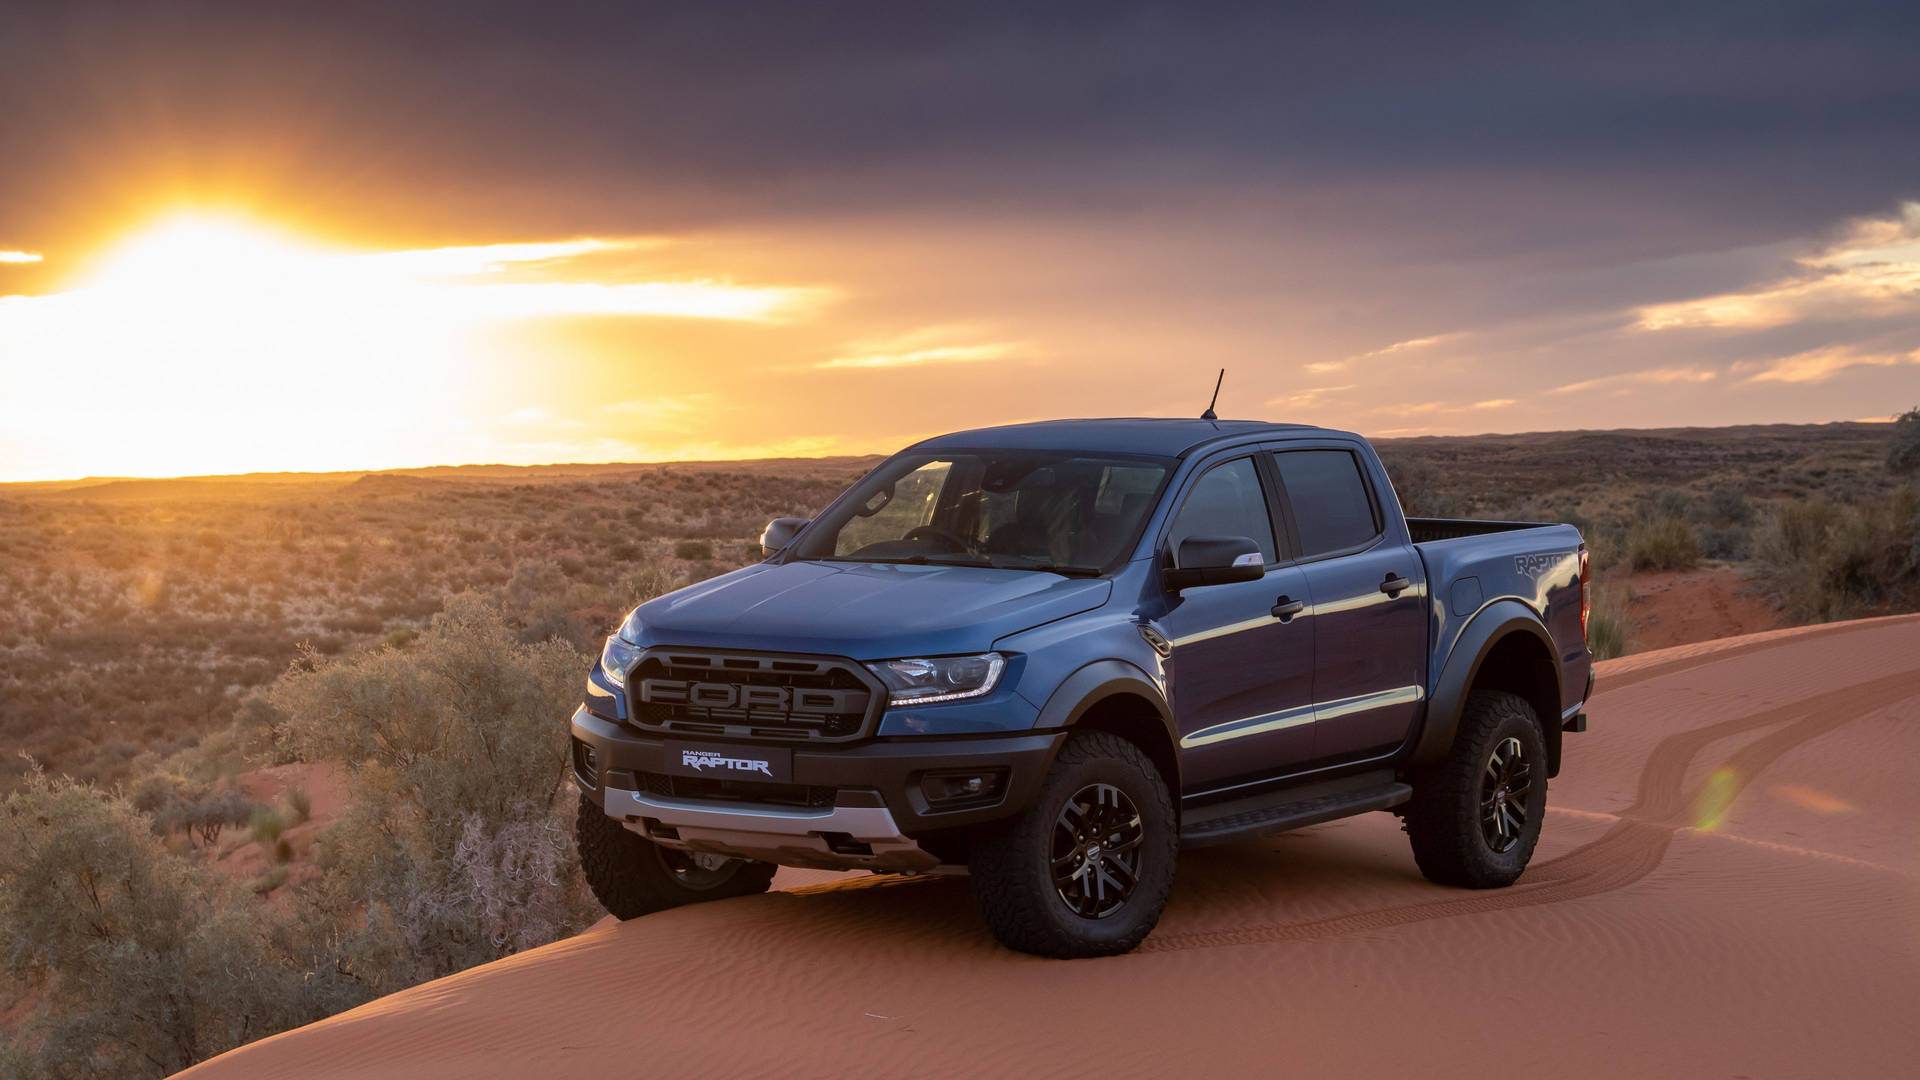 Ford Raptor With Sunset View Wallpaper